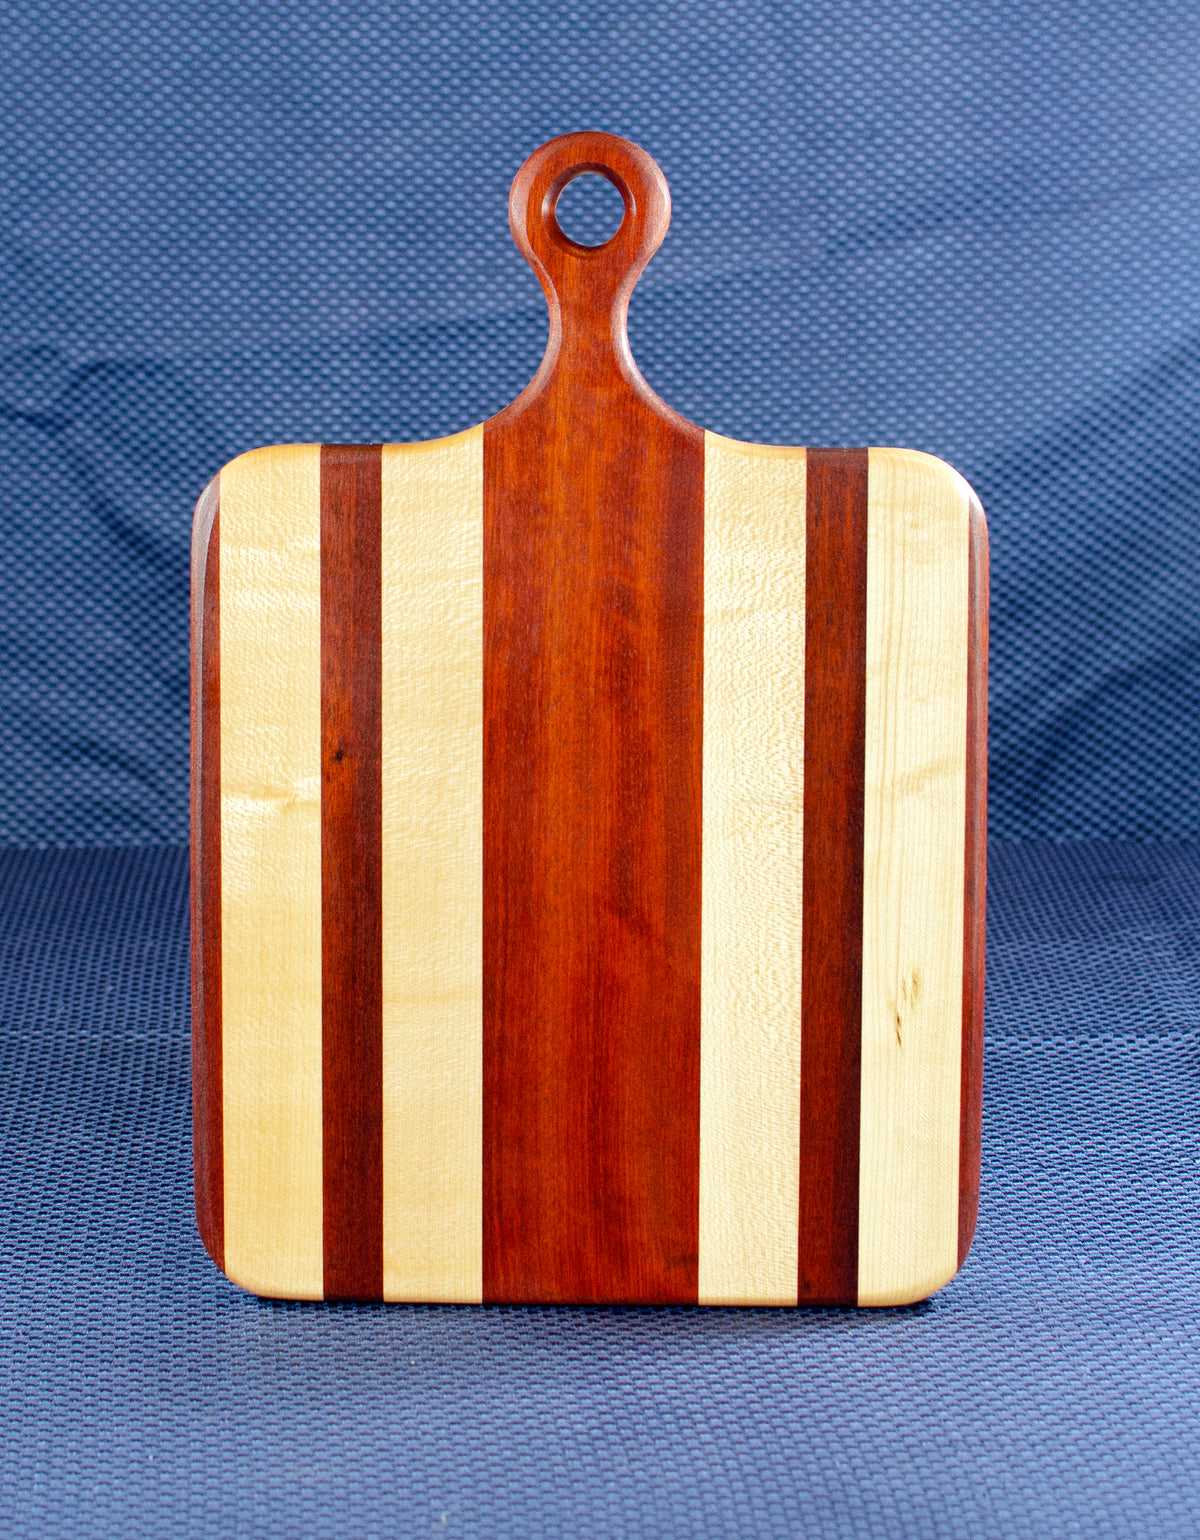 Small Handled Boards